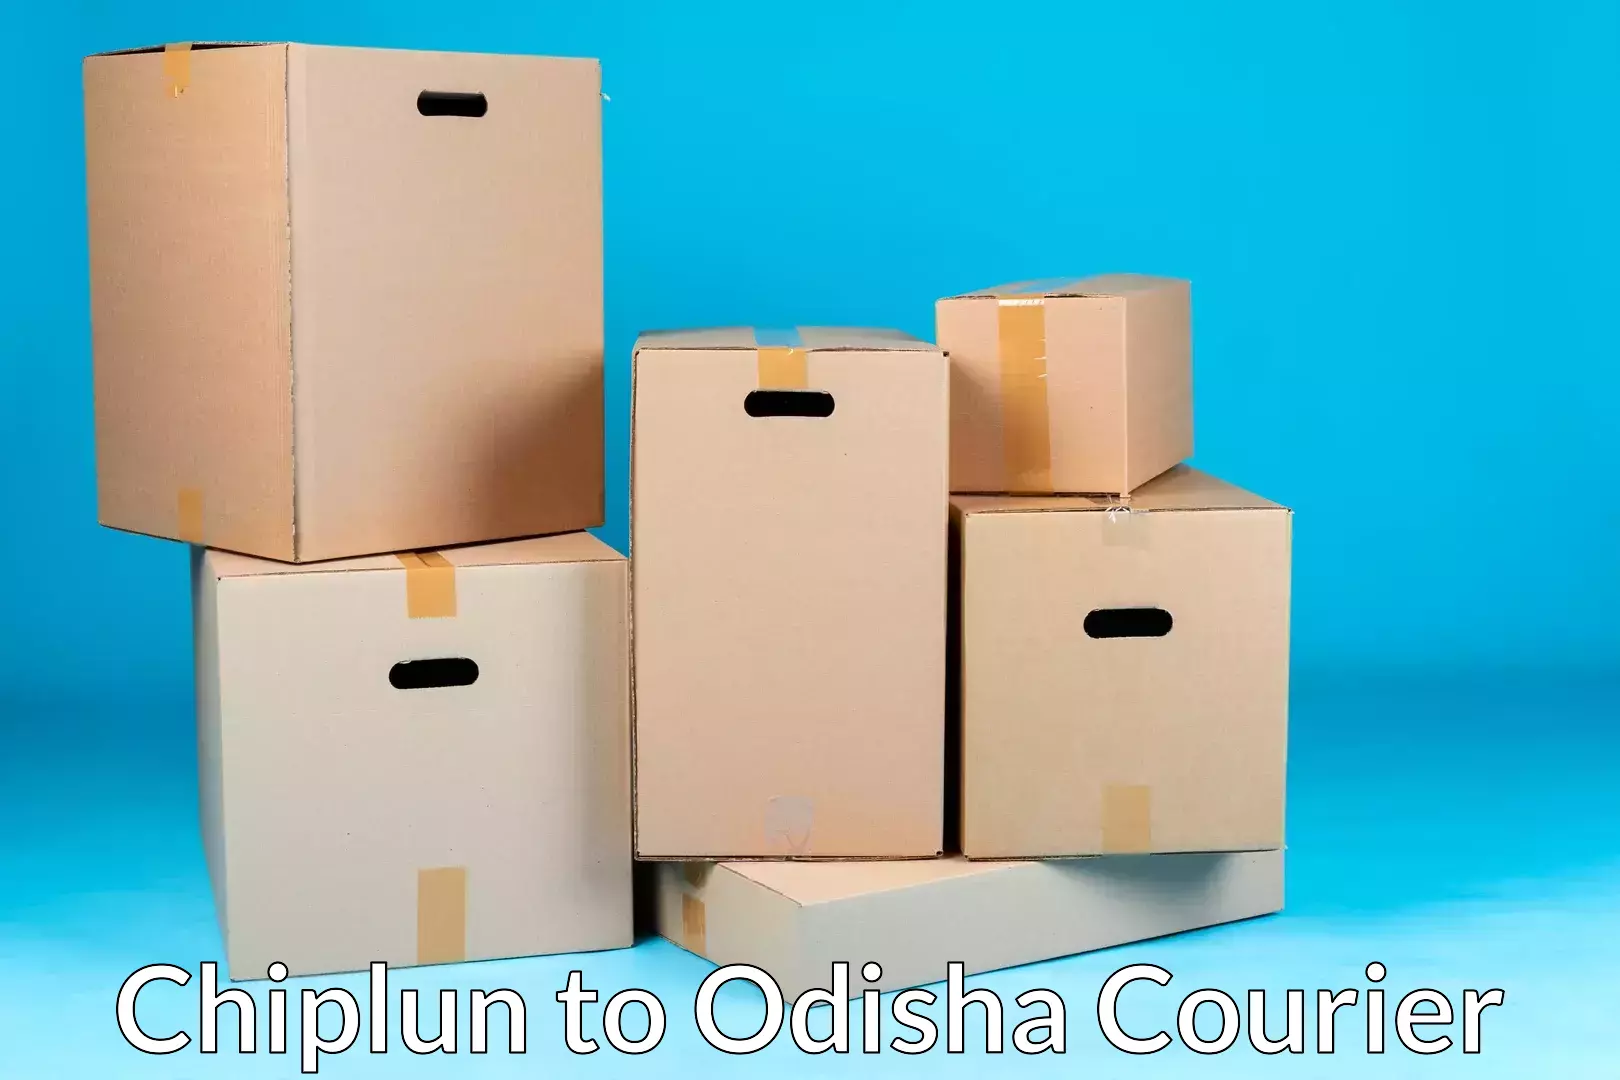 Quality relocation services in Chiplun to Bhubaneswar